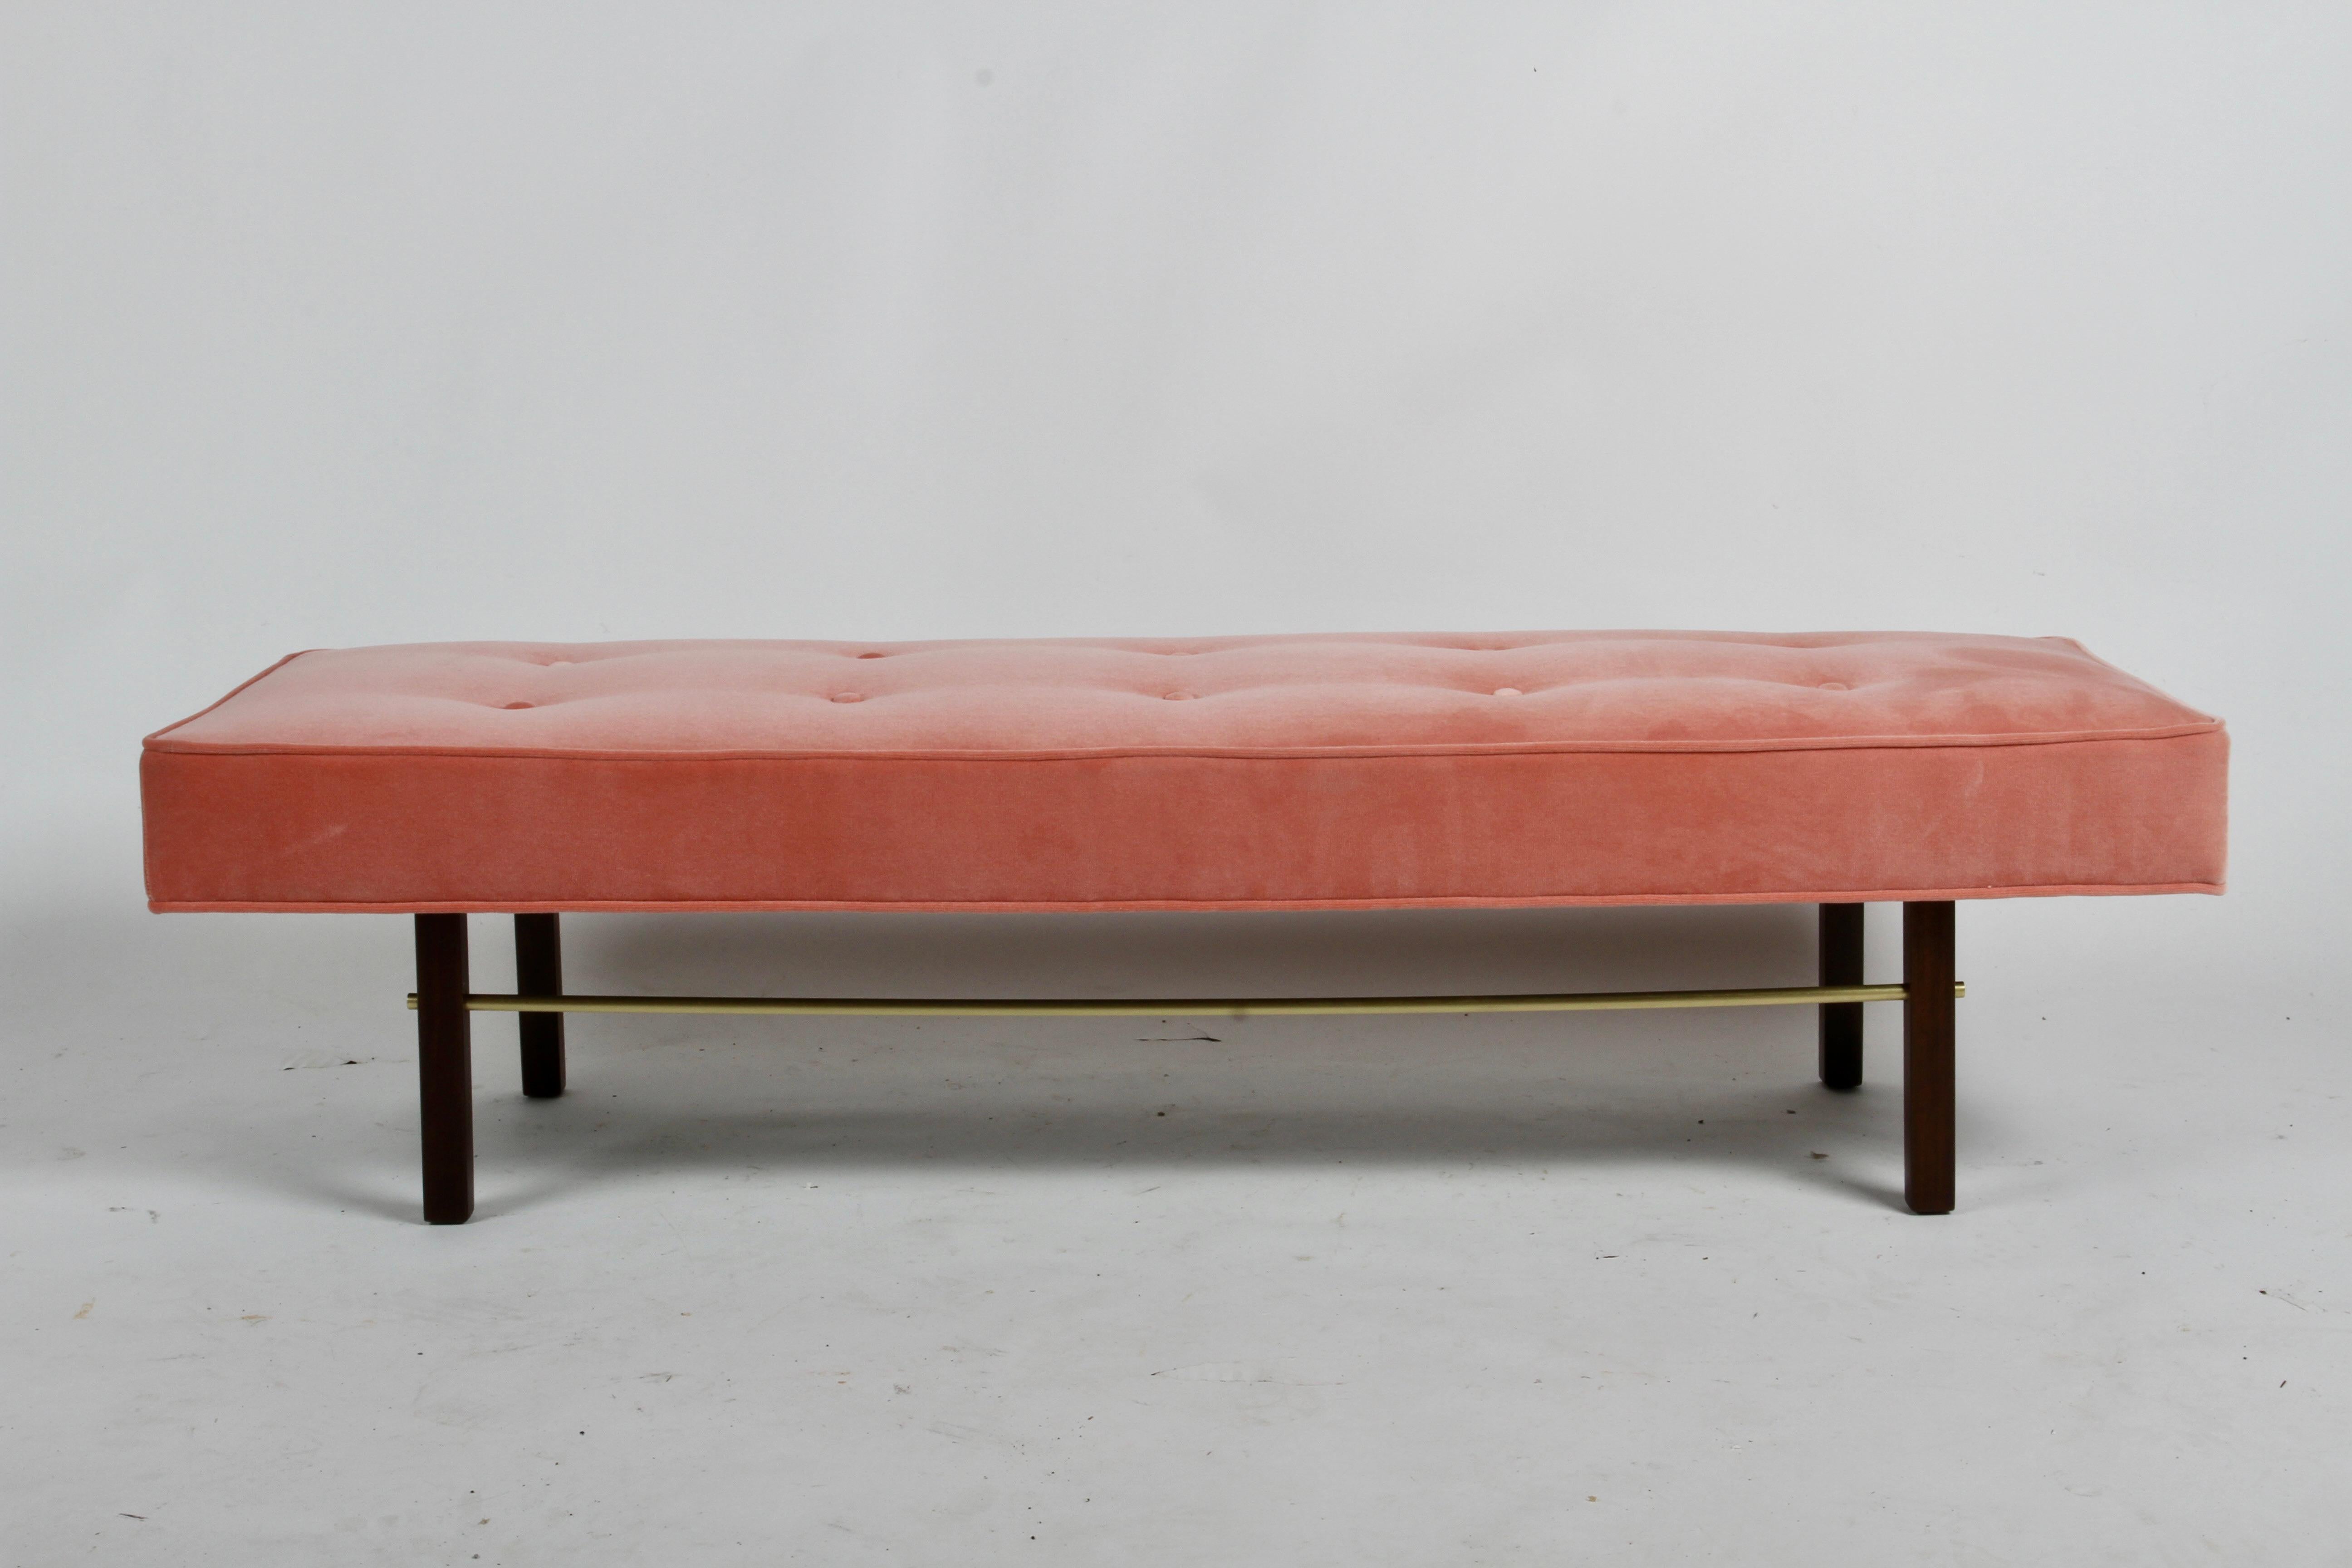 Beautifully restored classic mid-century modern Milo Baughman for James Inc. 5 foot 5 Inch tufted bench, reupholstered in Holly Hunt Salmon colored Velvet with solid brass cross stretchers and on dark brown mahogany legs. Retain original label. New